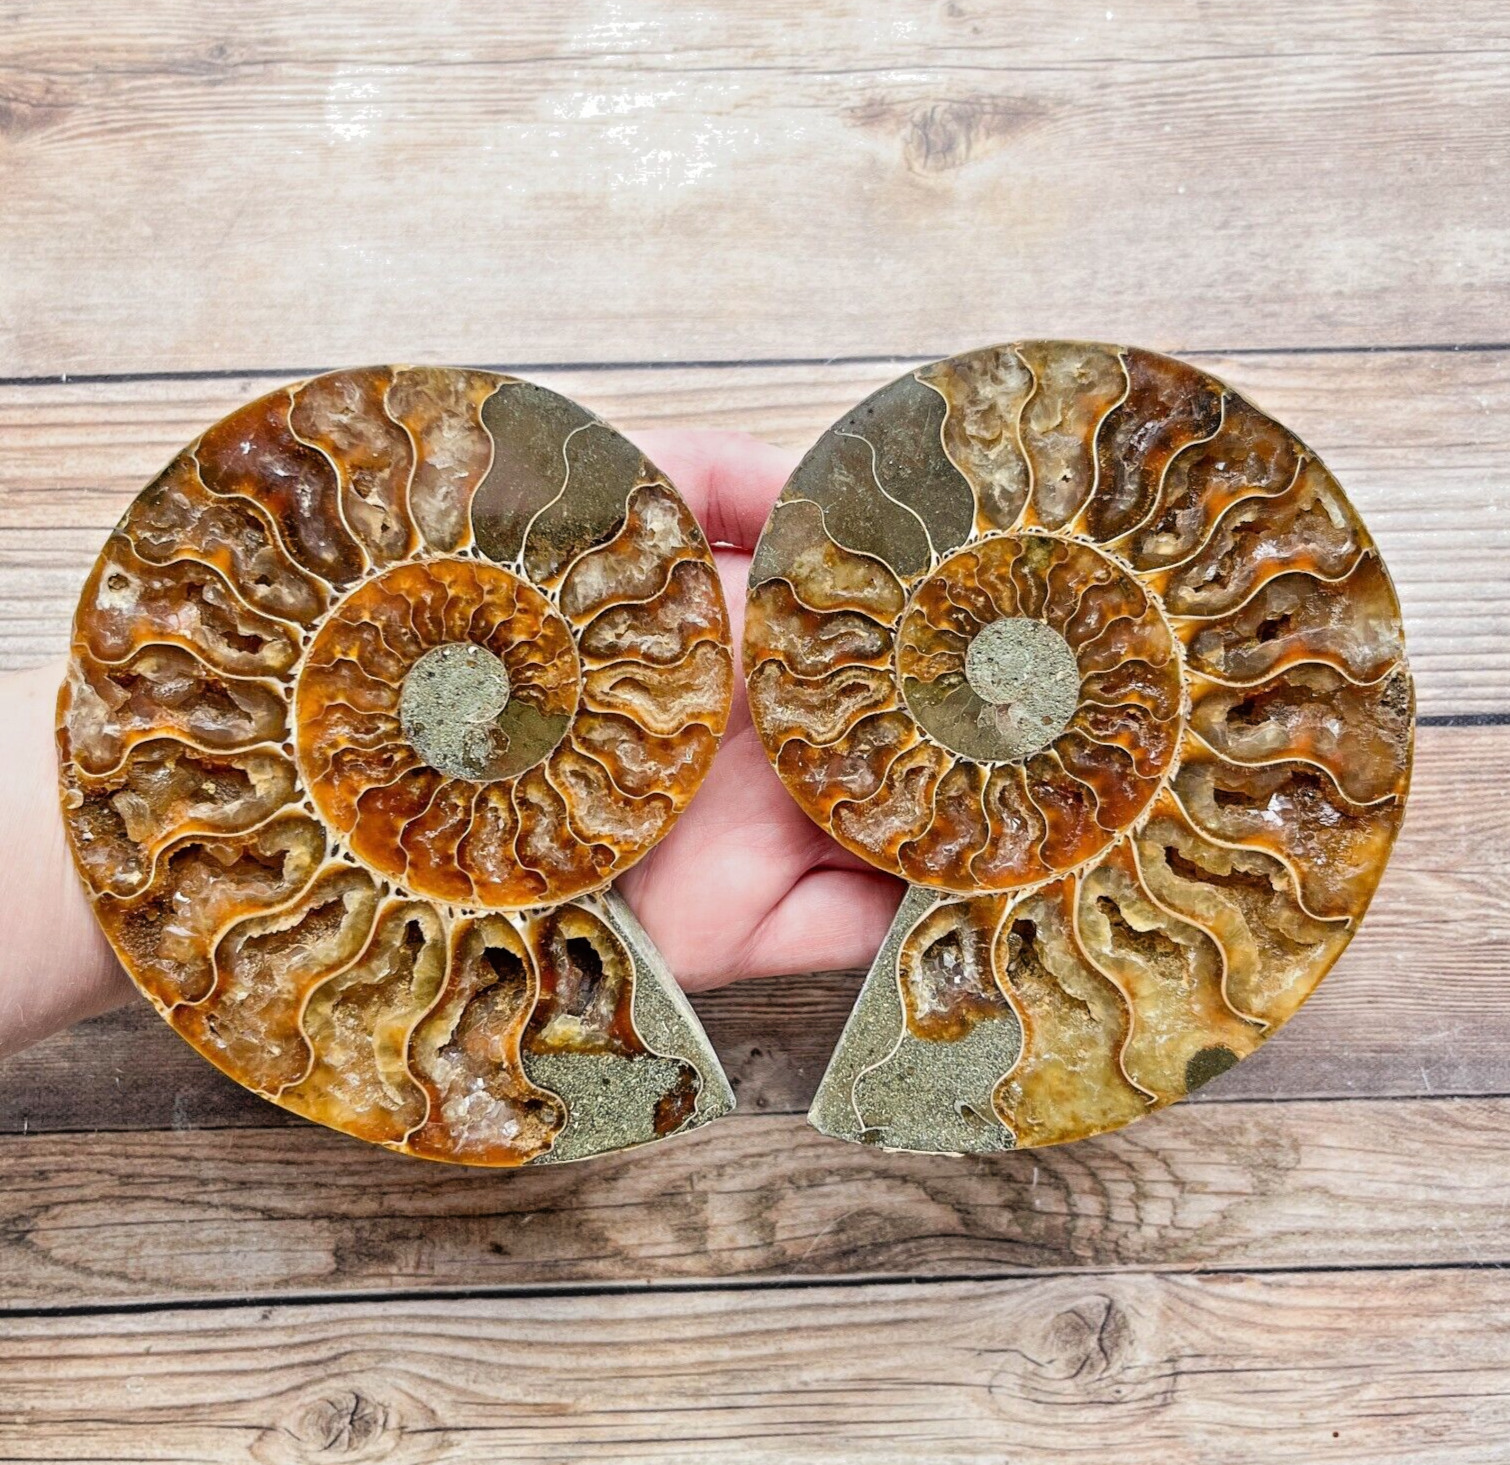 Ammonite Fossil Pair with Calcite Chambers 446g, Polished